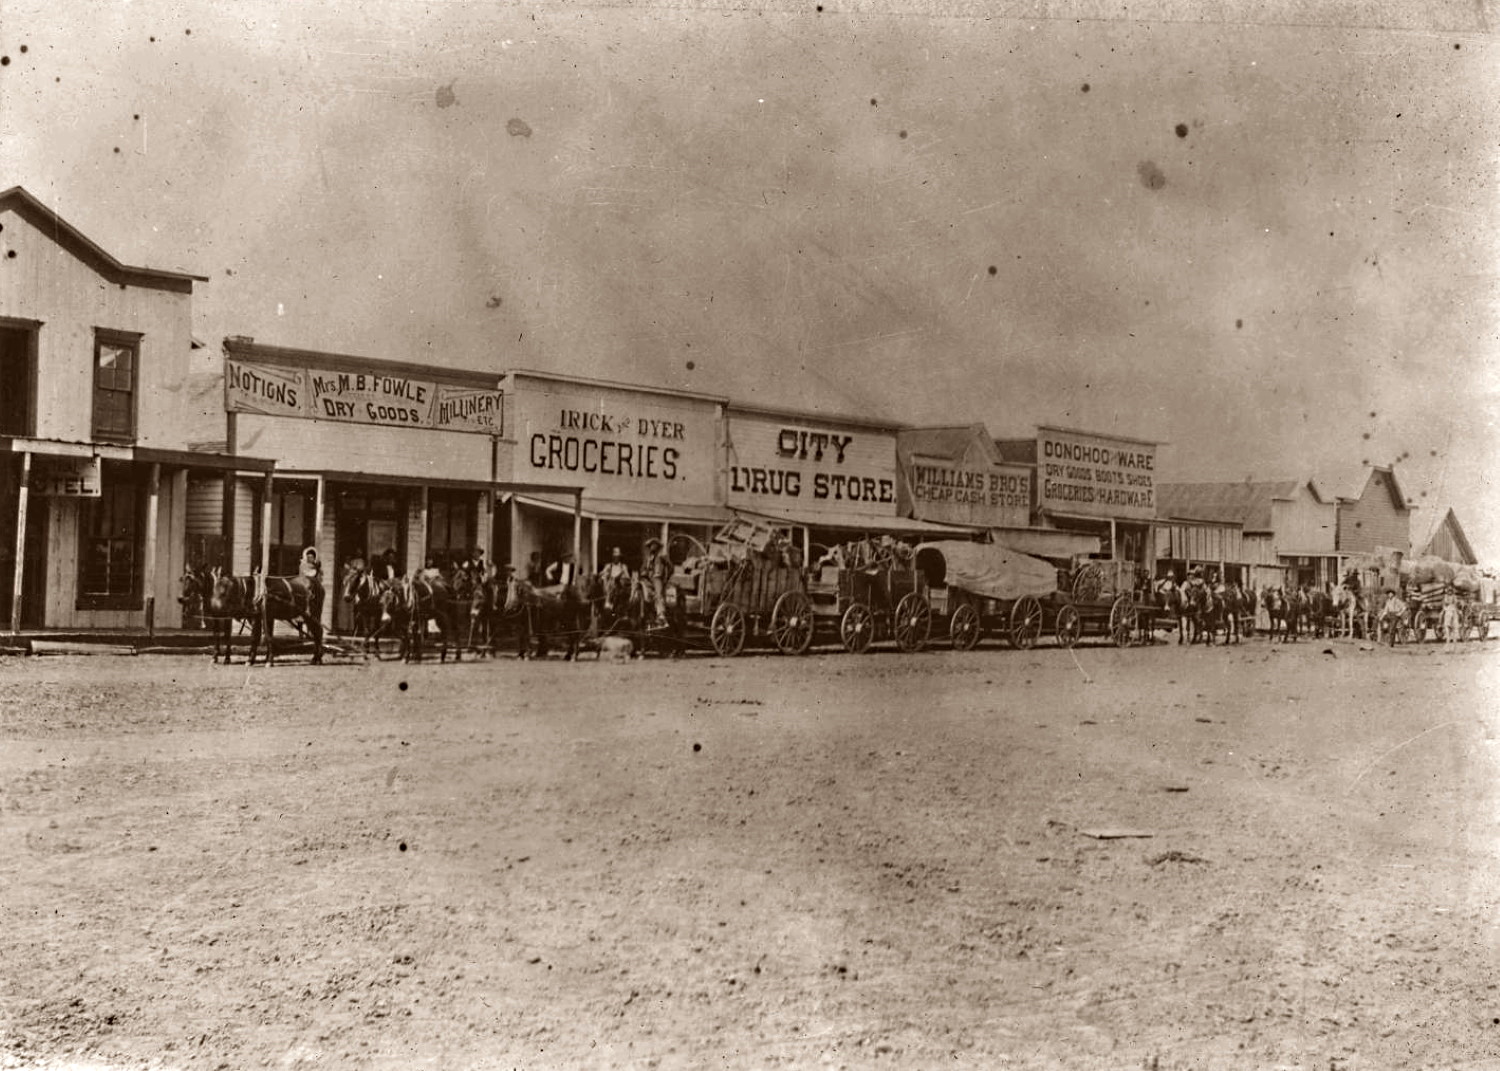 Downtown Plainview Texas in1897